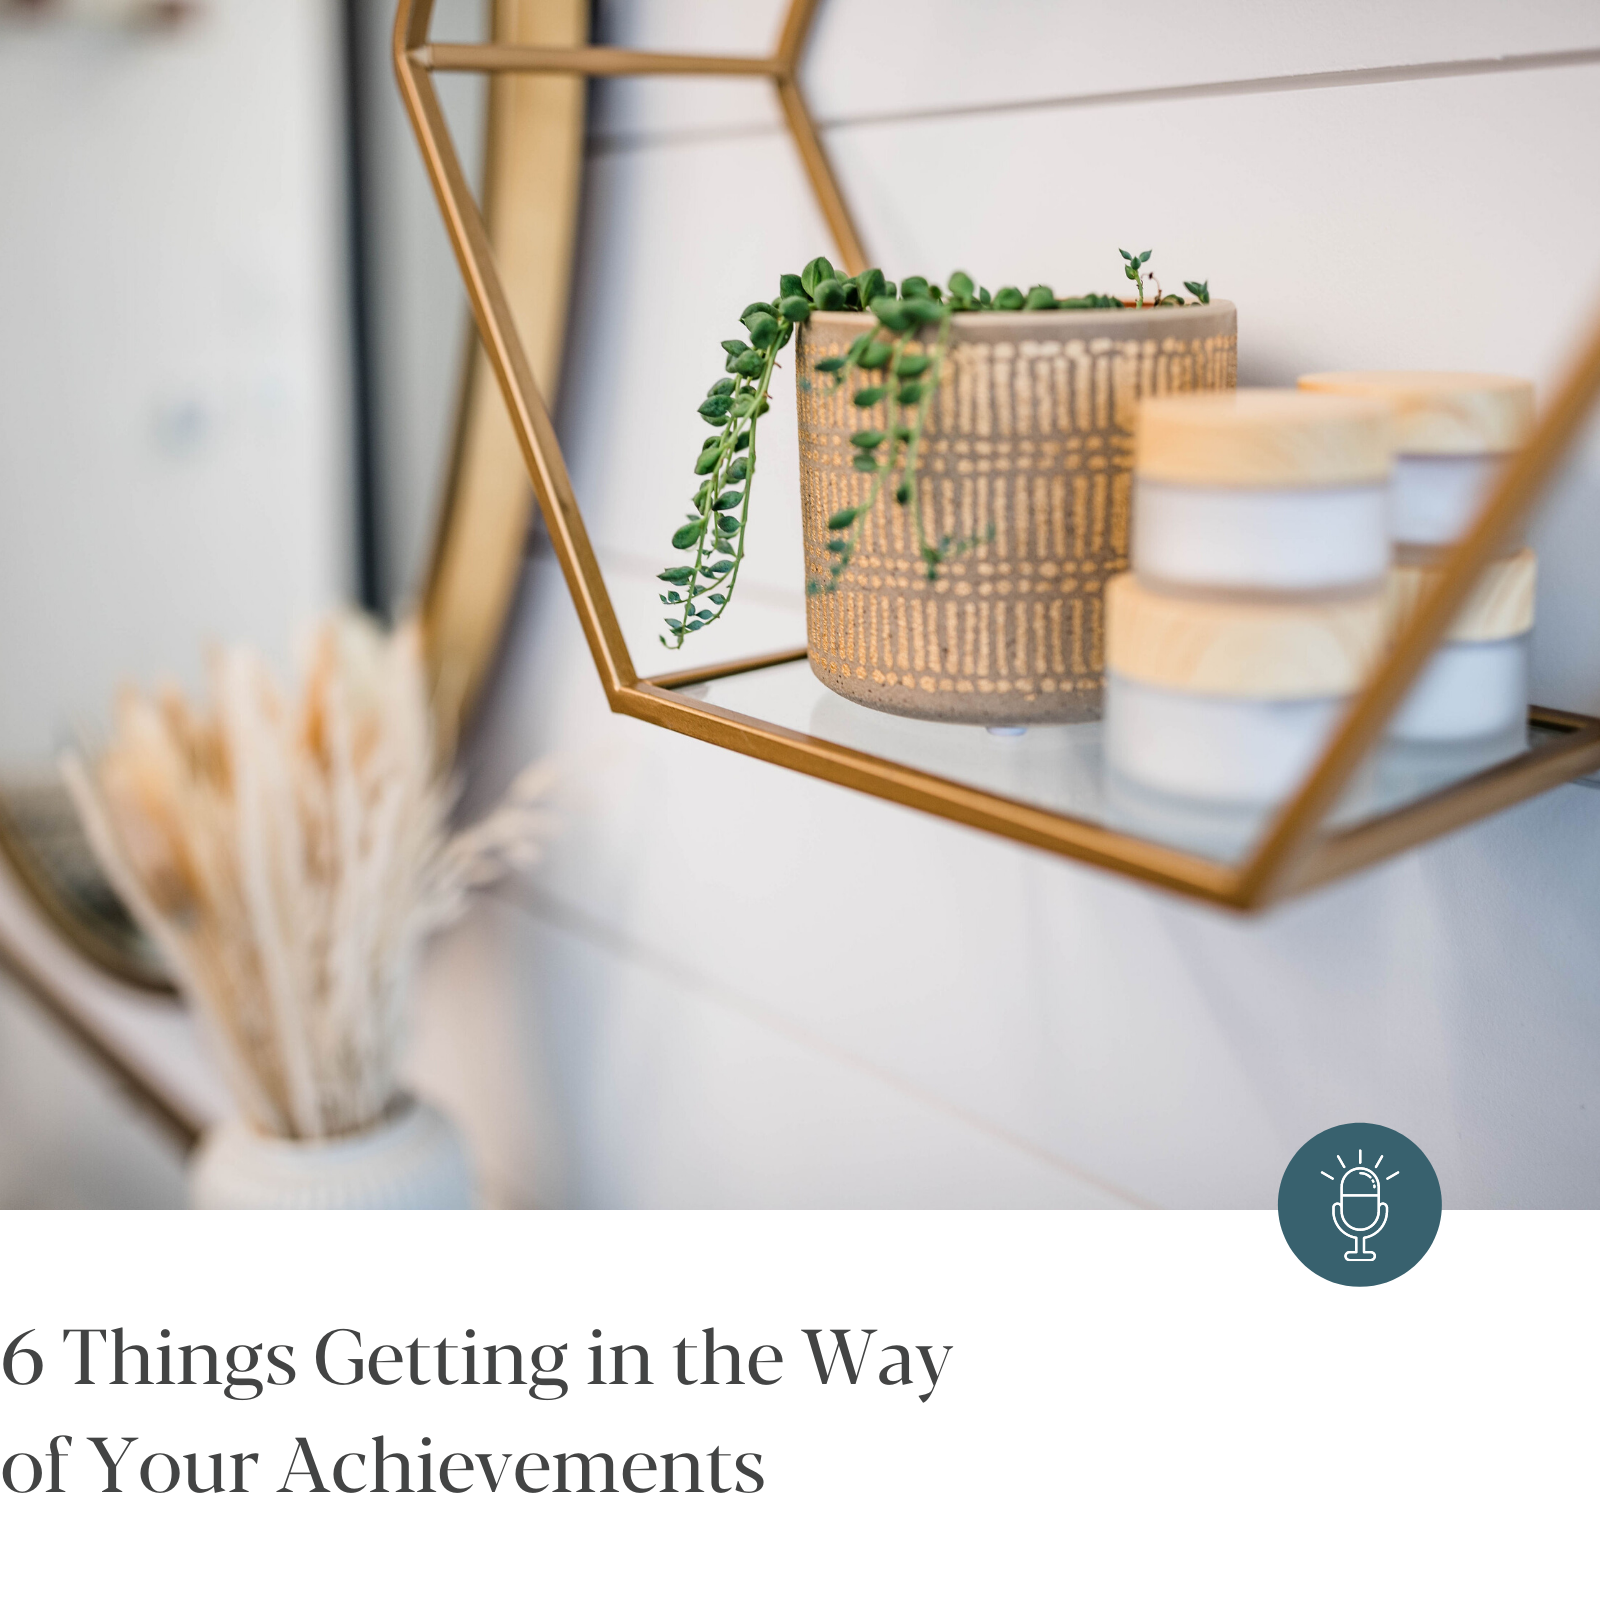 Episode #203 - 6 Things Getting in the Way of Your Achievements